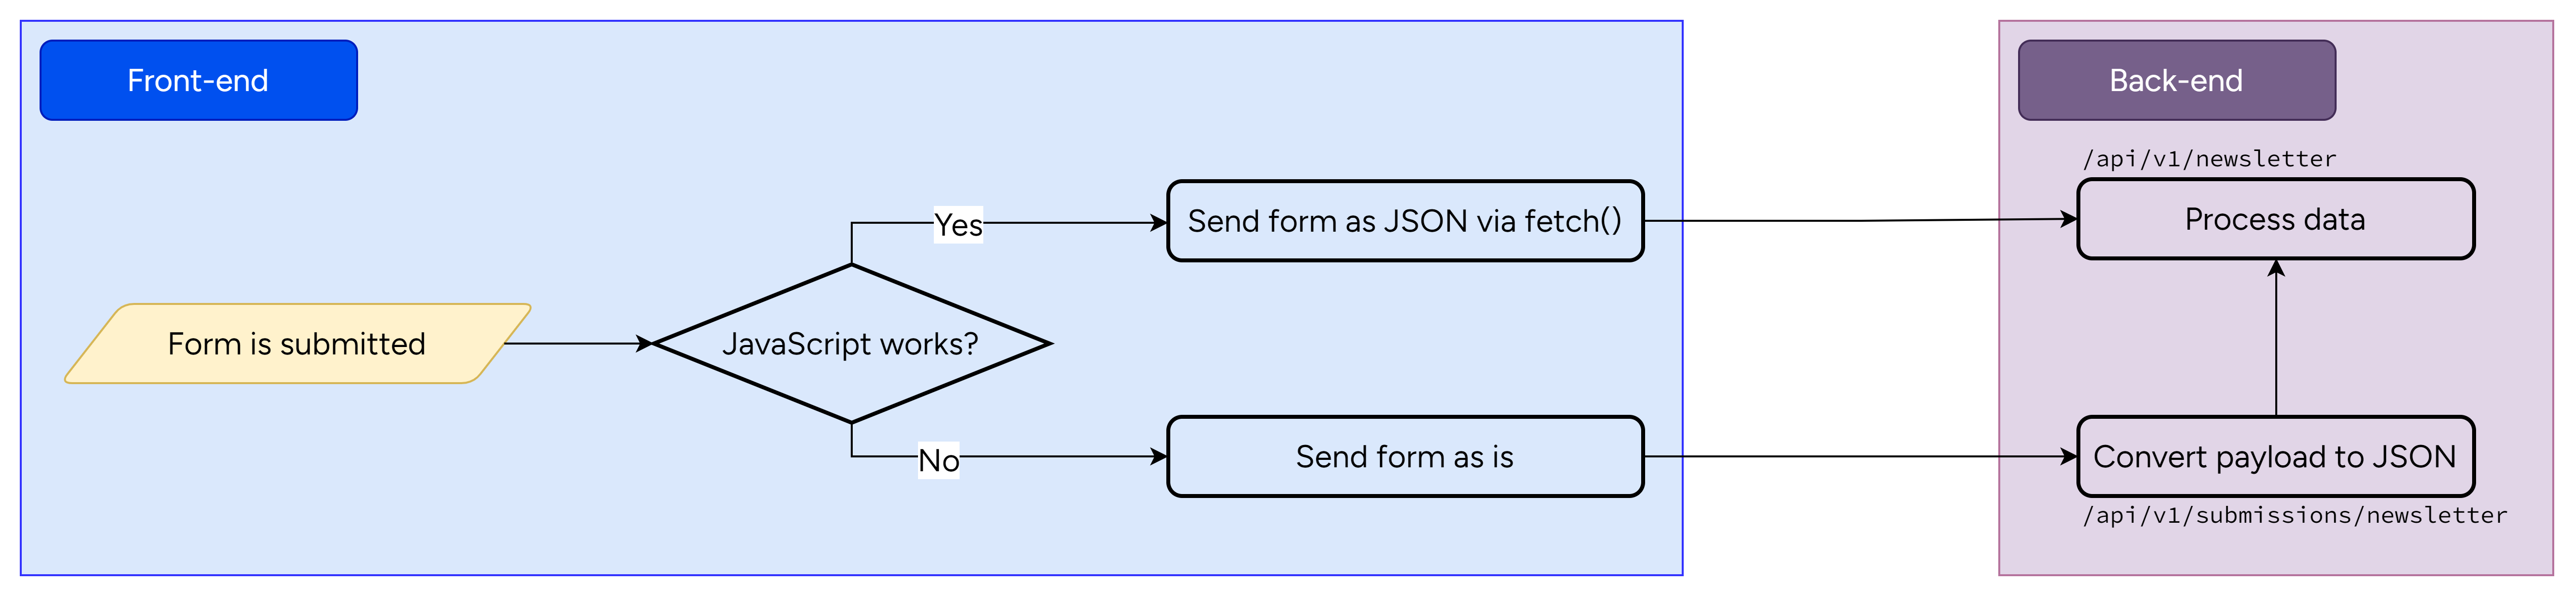 Data flow for progressively enhanced form submission. On form submission, if JavaScript is enabled and working properly, data is extracted from the form and is converted to JSON before sending to the server in the background. If JavaScript is disabled or not working properly, the form is submitted to an endpoint in the server that converts the payload into JSON before sending it again to the endpoint that processes the data.